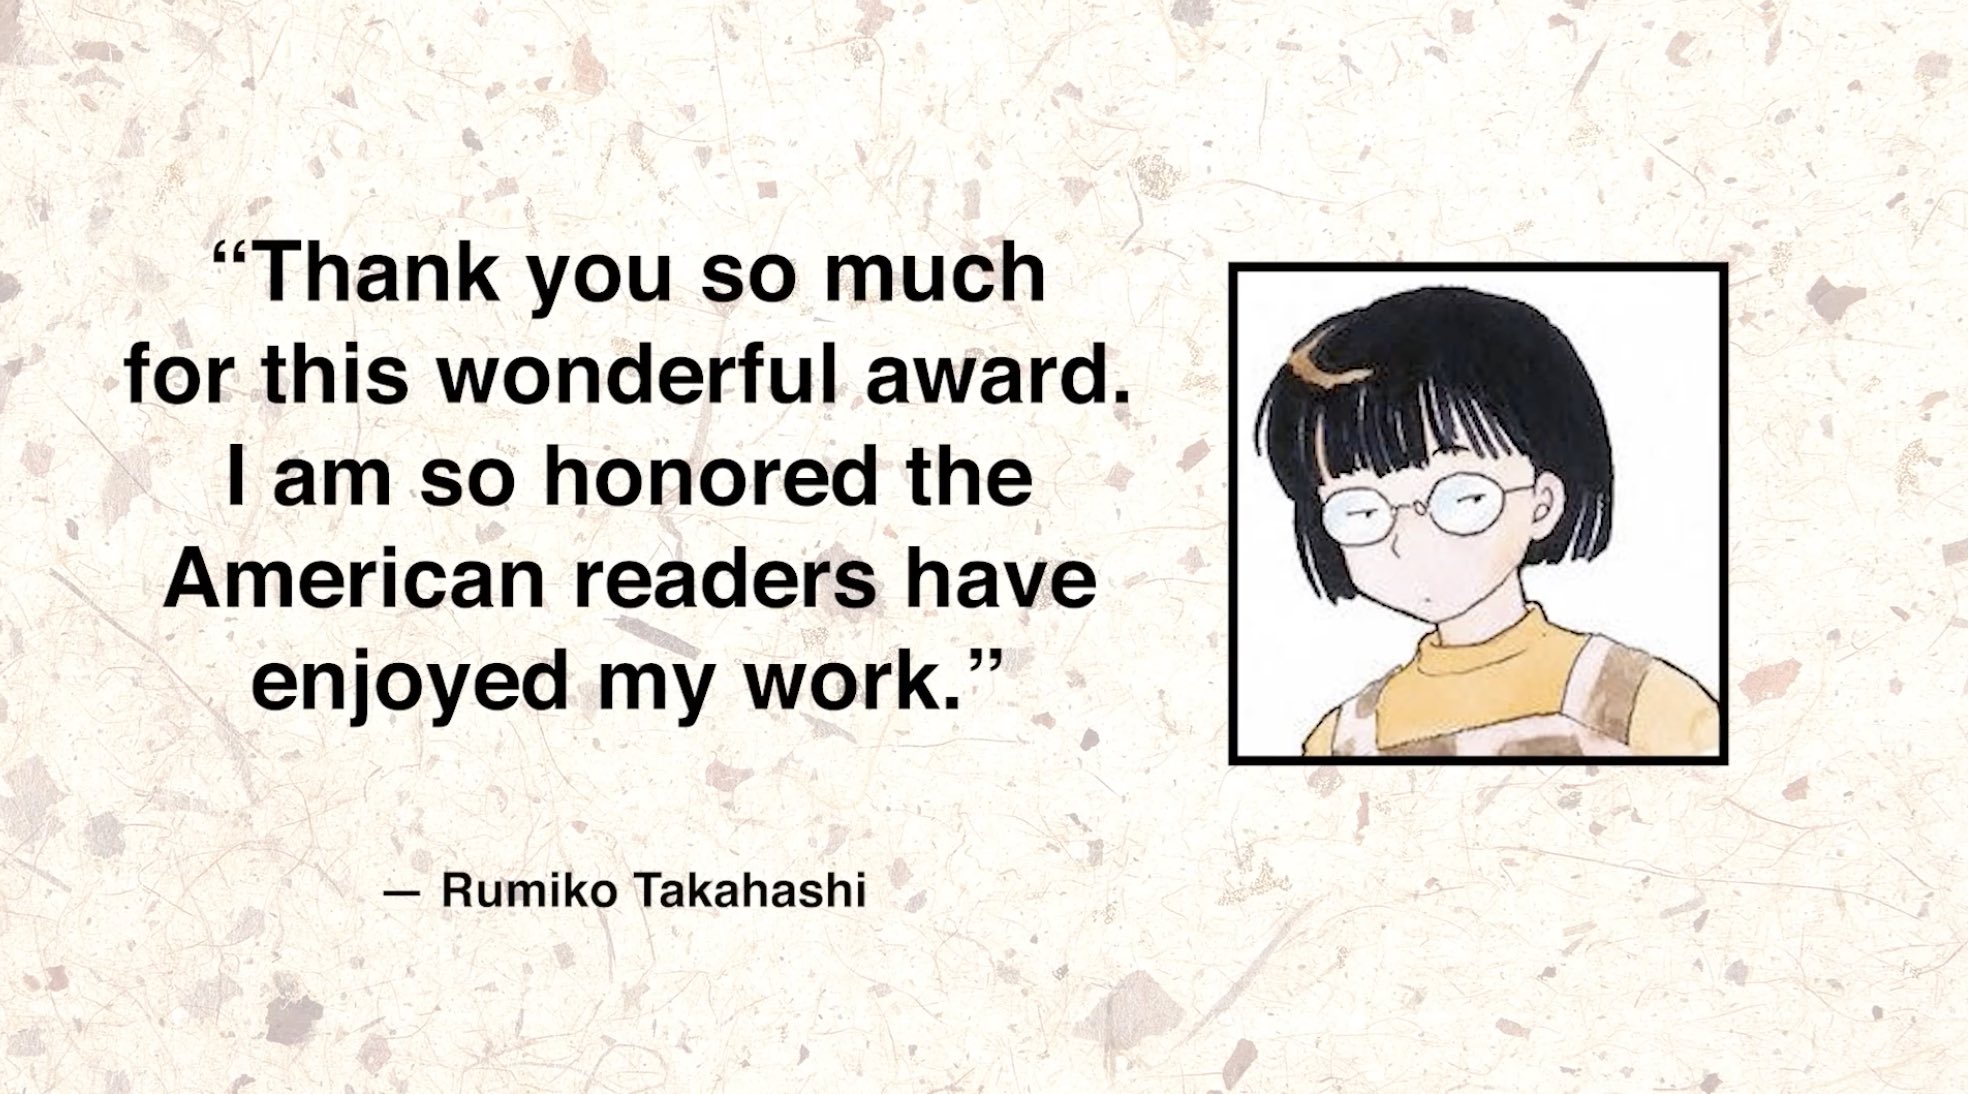 Rumiko Takahashi's comment on getting into the Hall of Fame